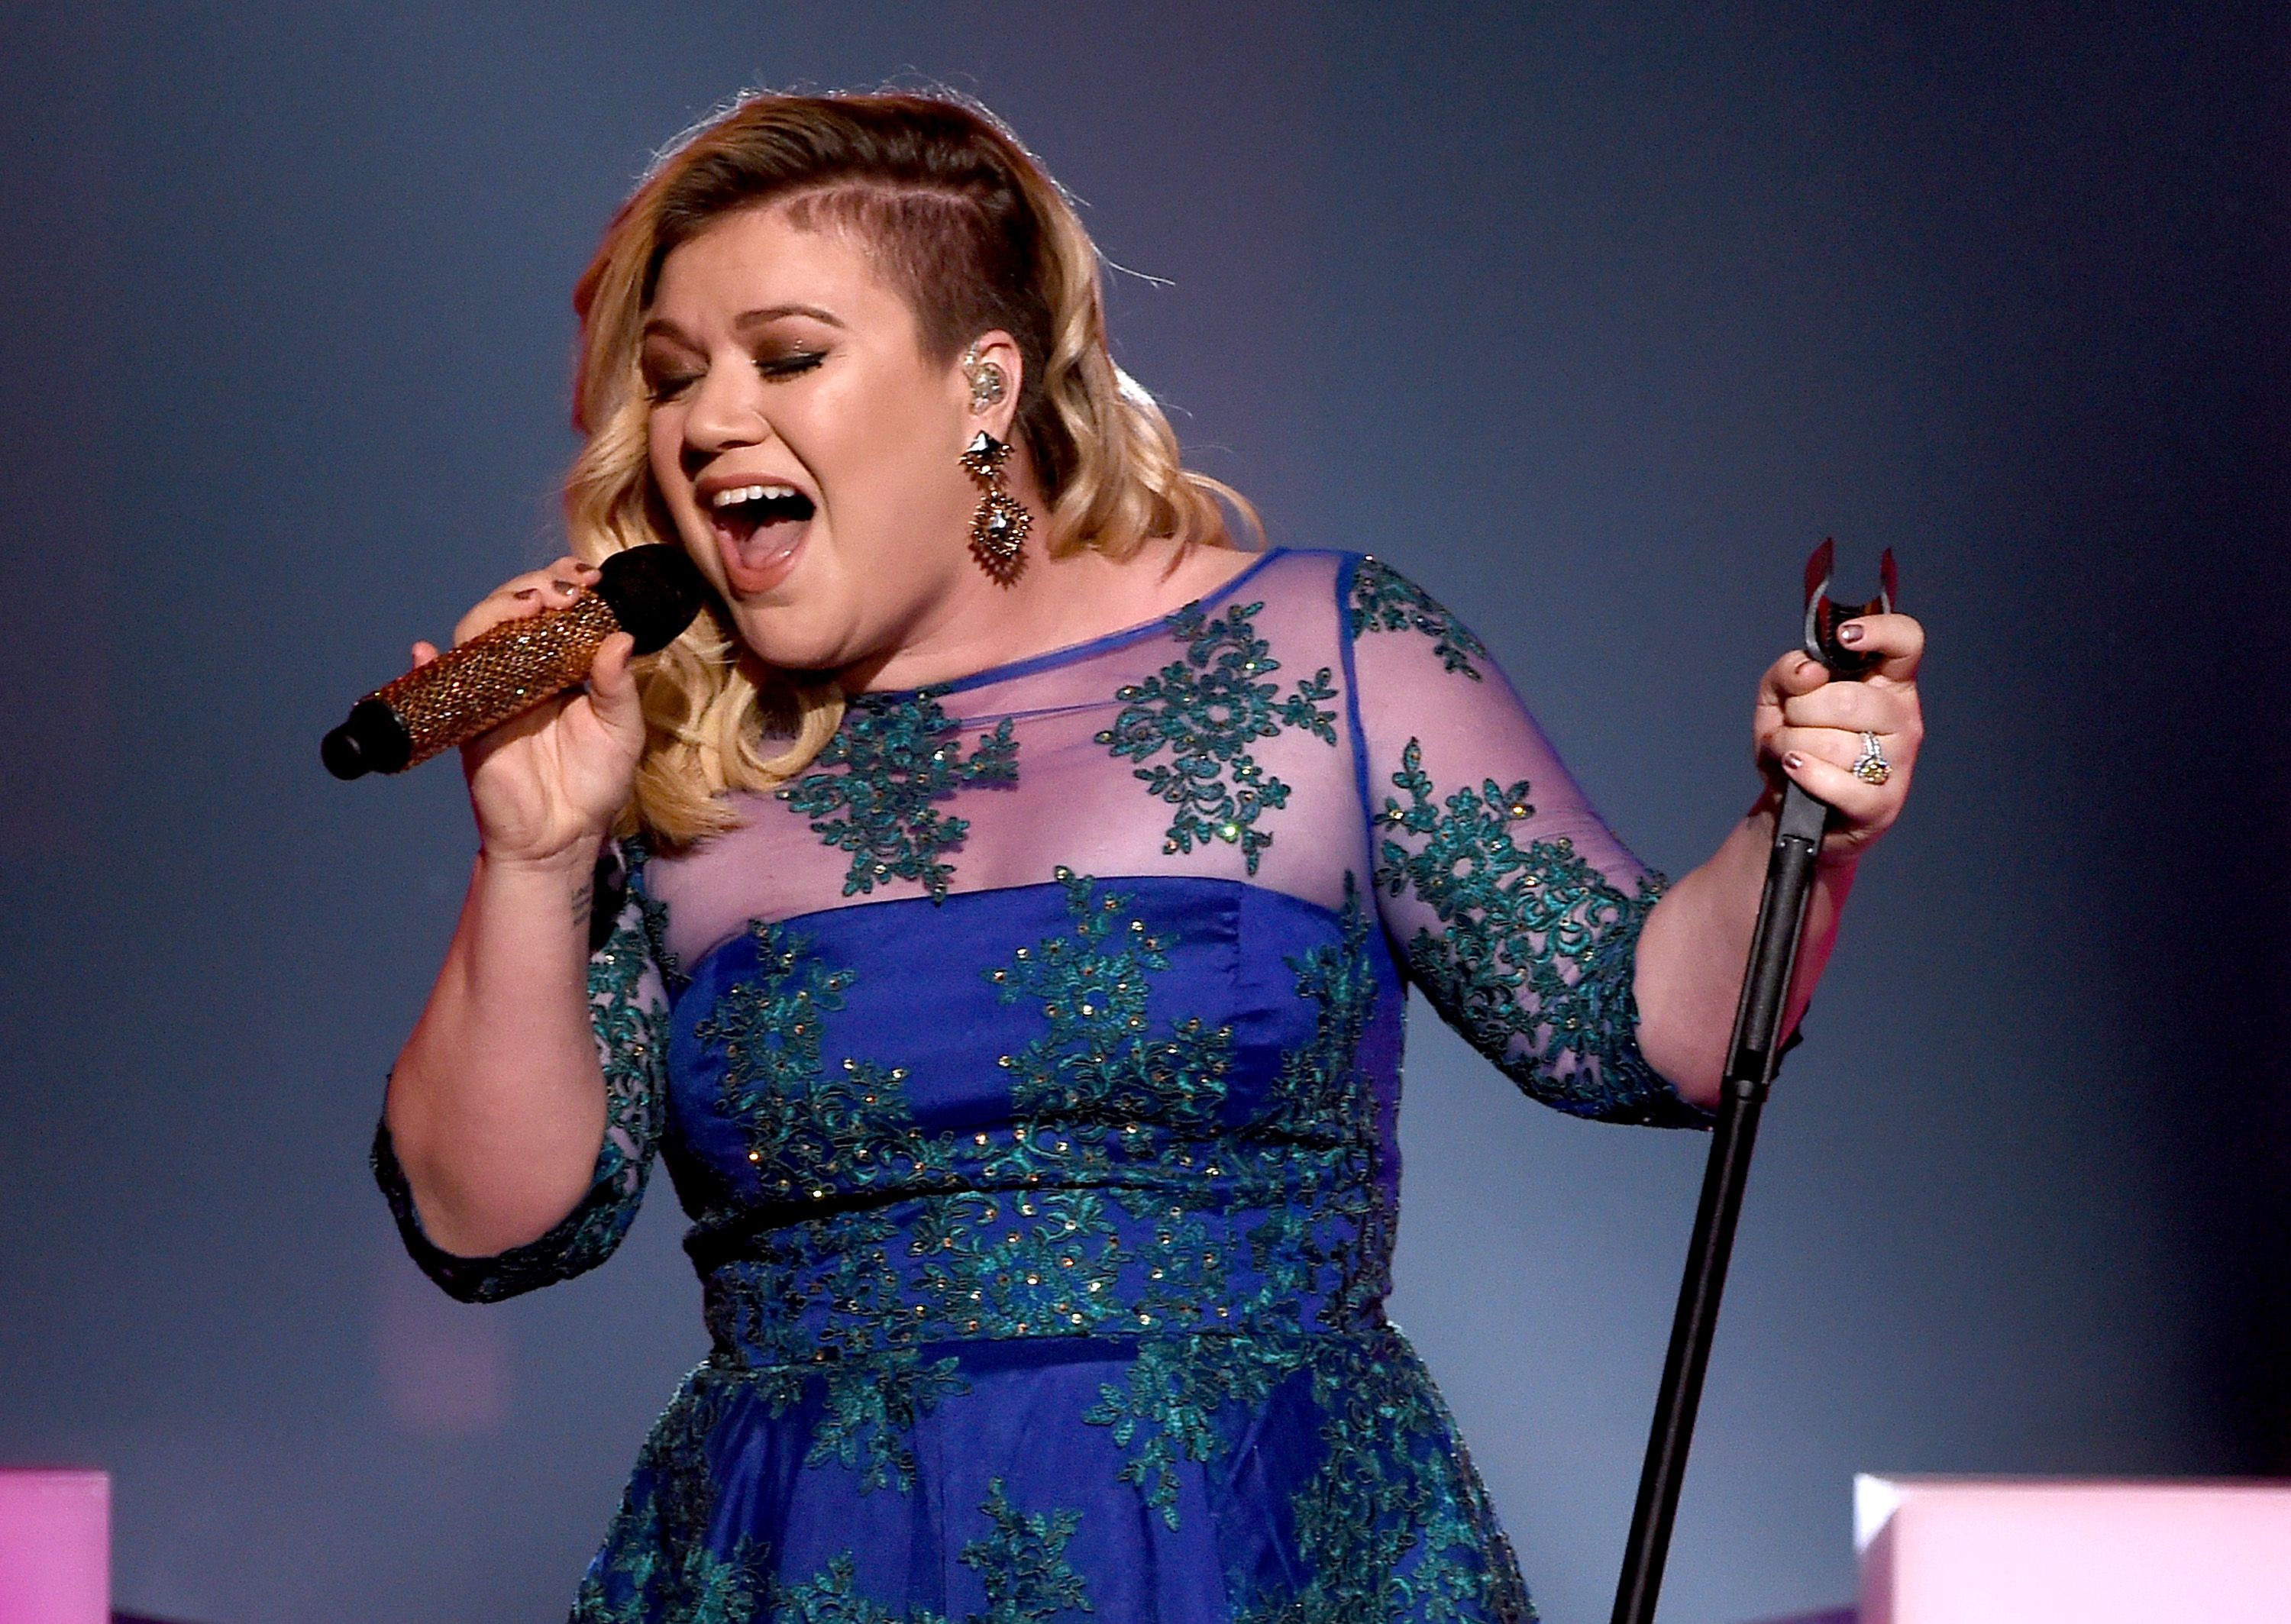 Kelly Clarkson performs 'Heartbeat Song' onstage at the 2015 iHeartRadio Music Awards on The Shrine Auditorium on March 29, 2015 | Photo: Getty Images